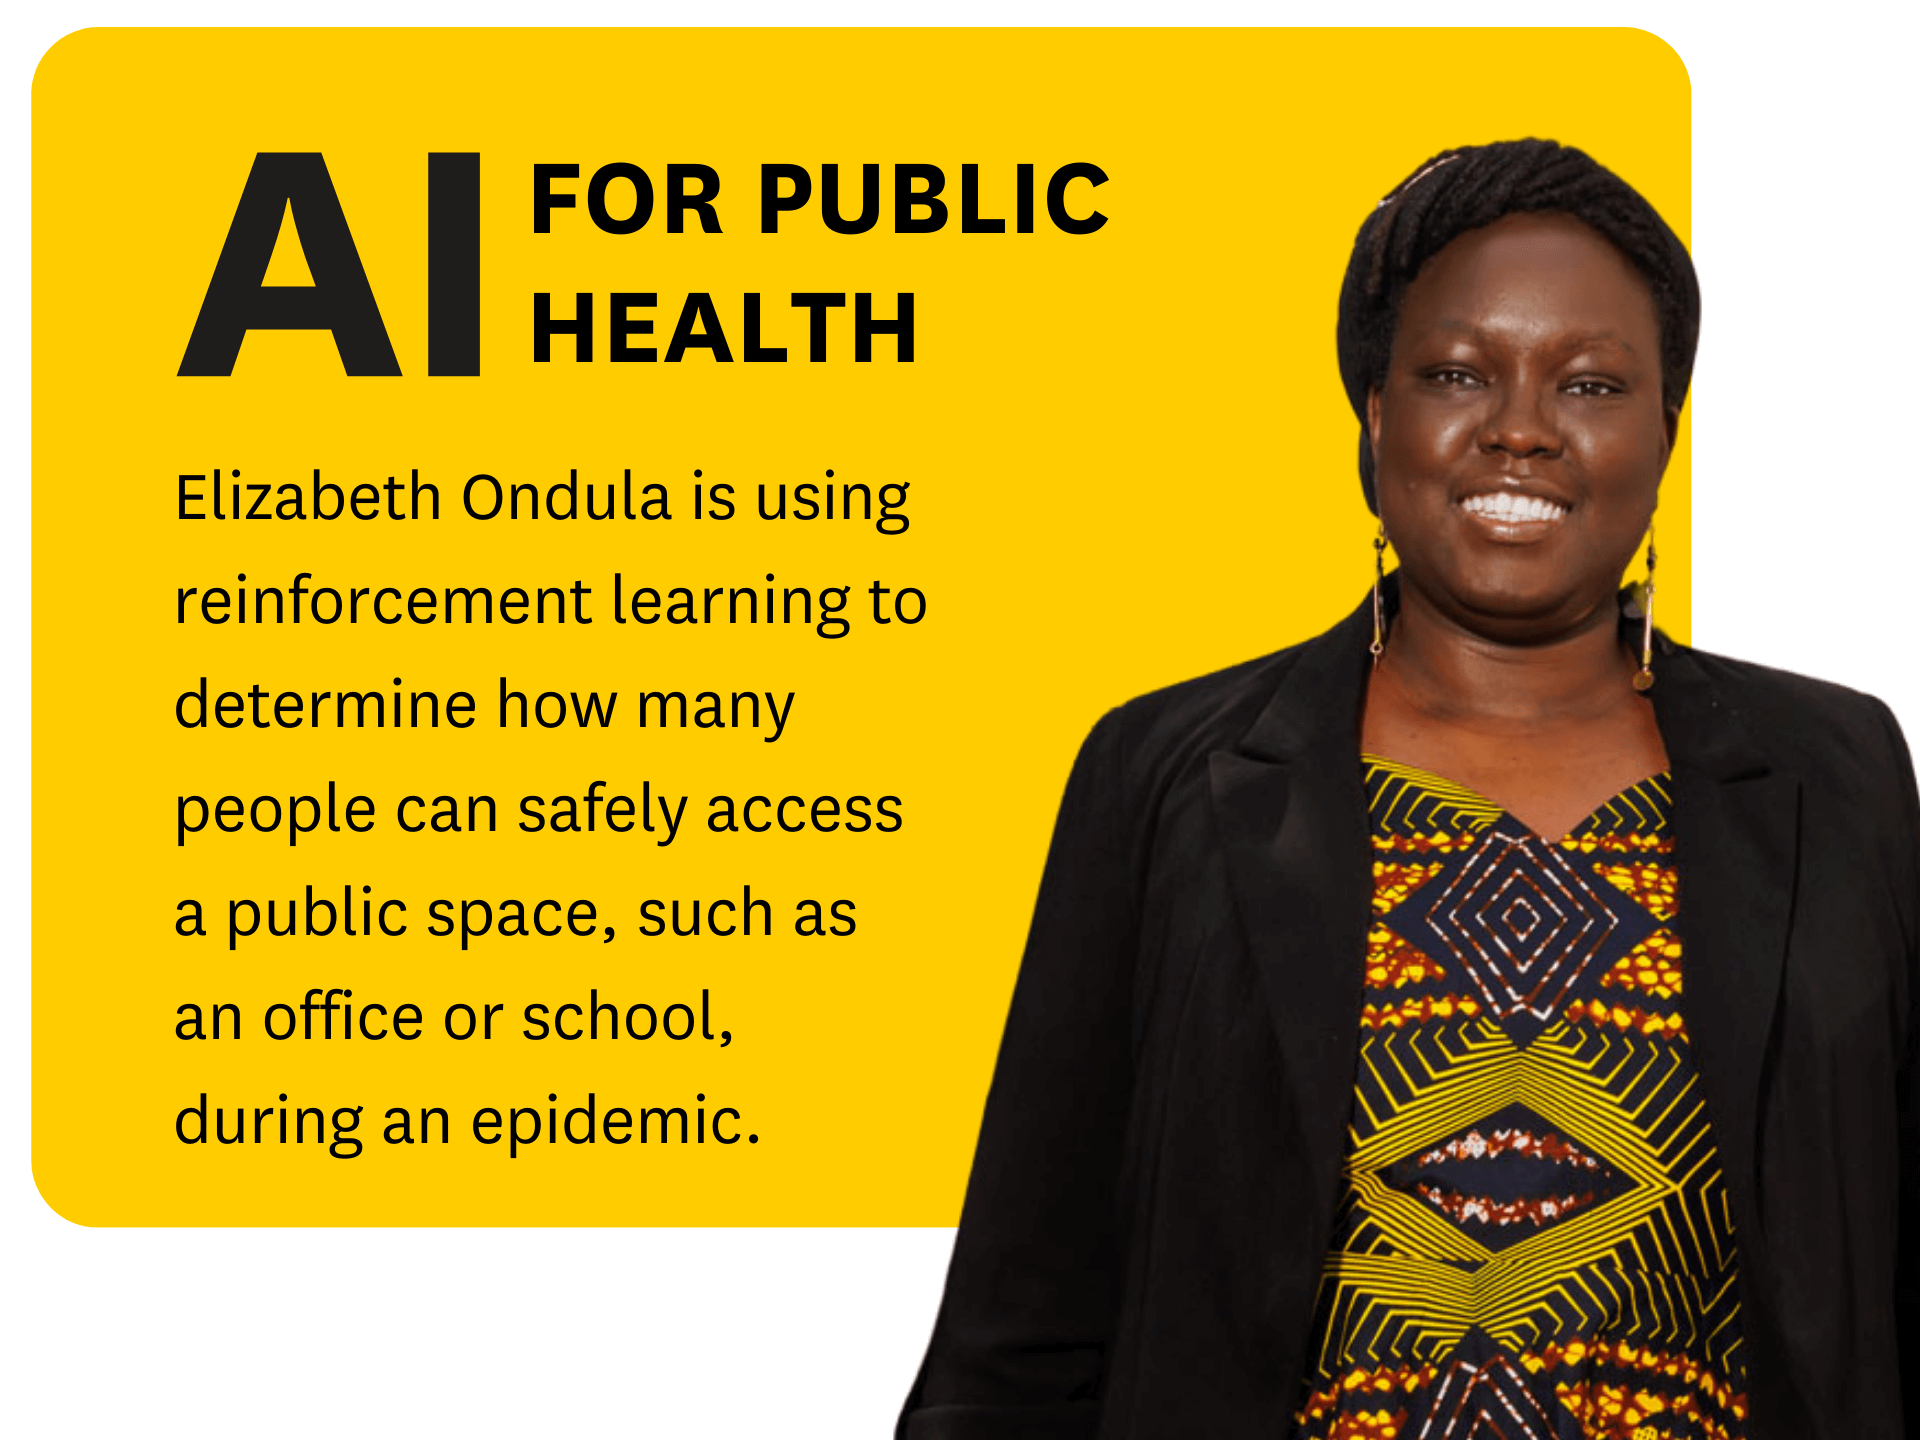 Elizabeth Ondula is using reinforcement learning to determine how many people can safely access a public space, such as an office or school, during an epidemic.